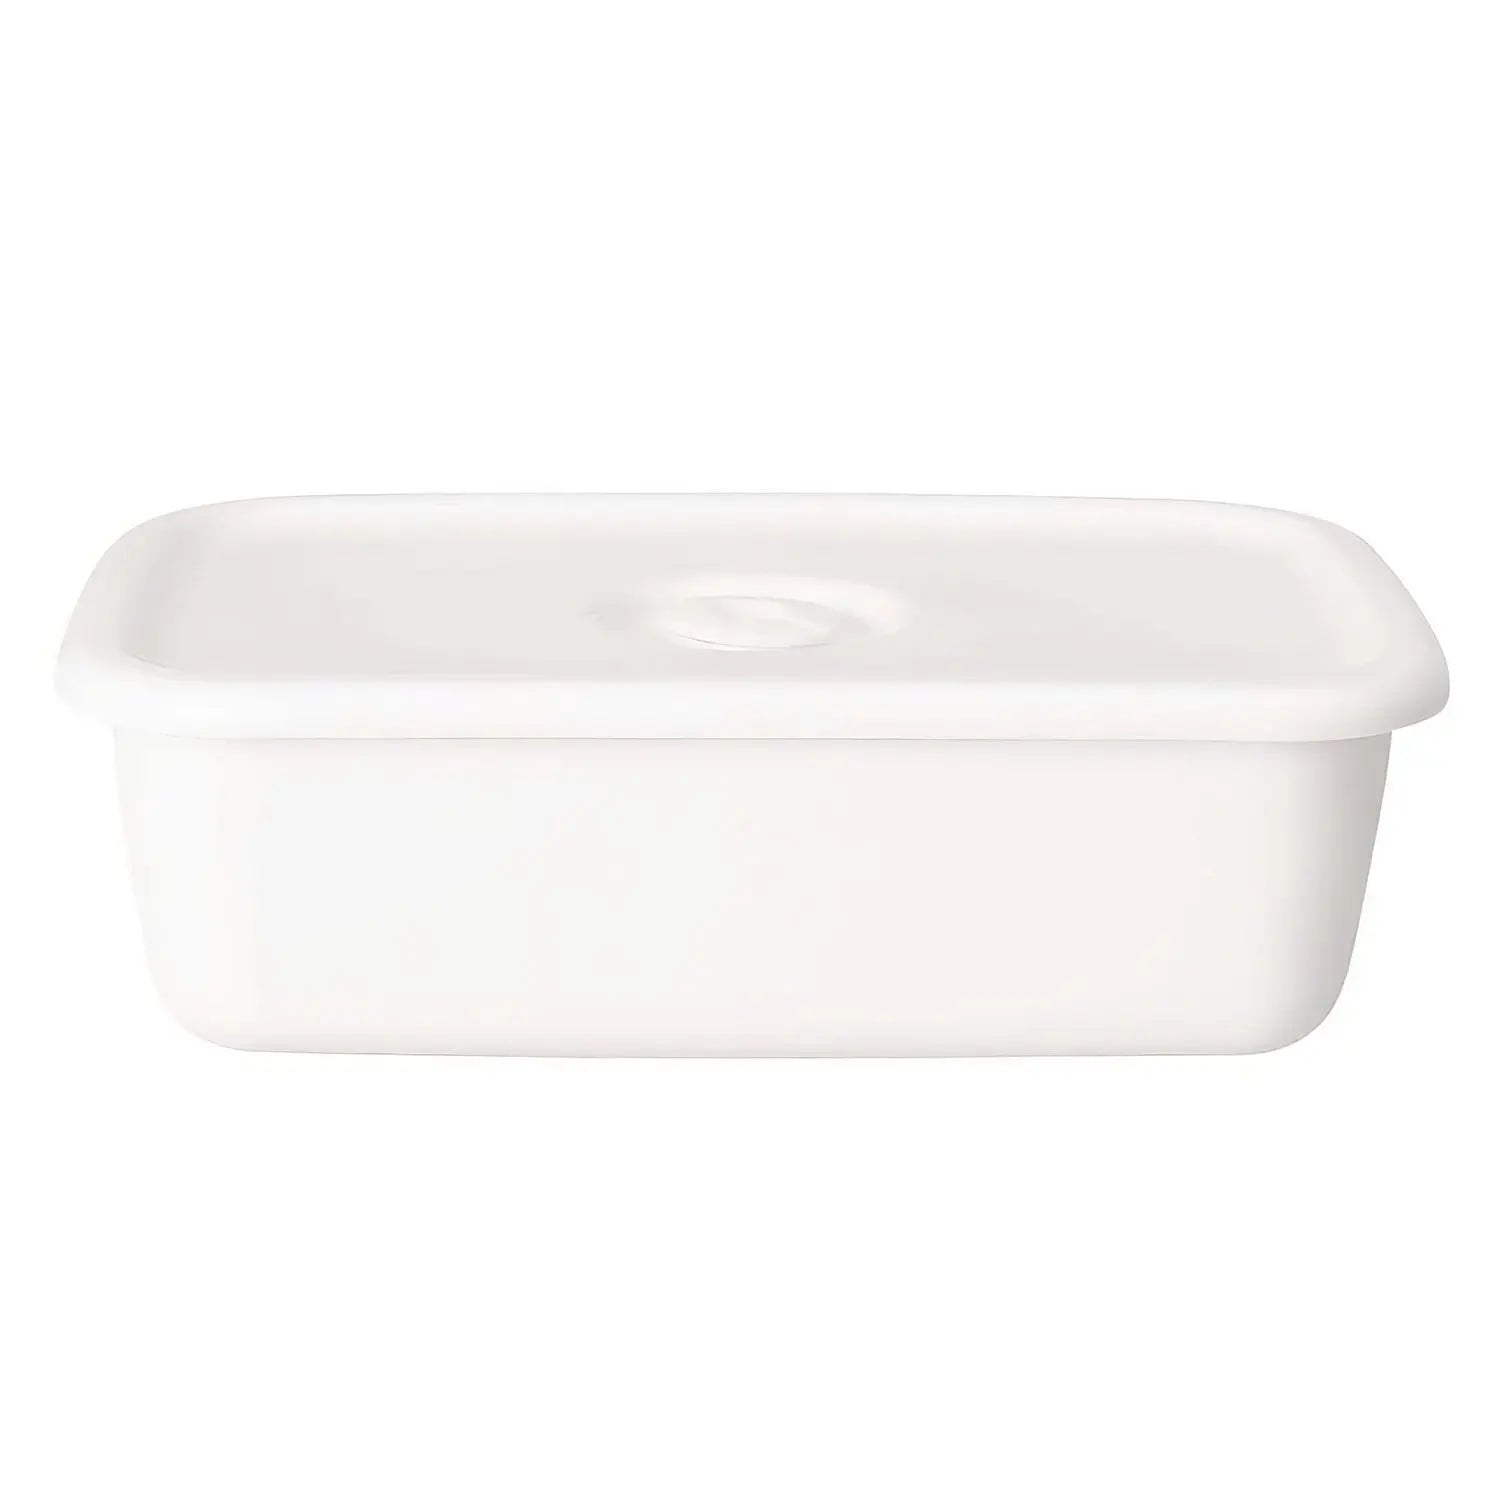 Noda Horo White Series Enamel Rectangle Deep Food Containers with